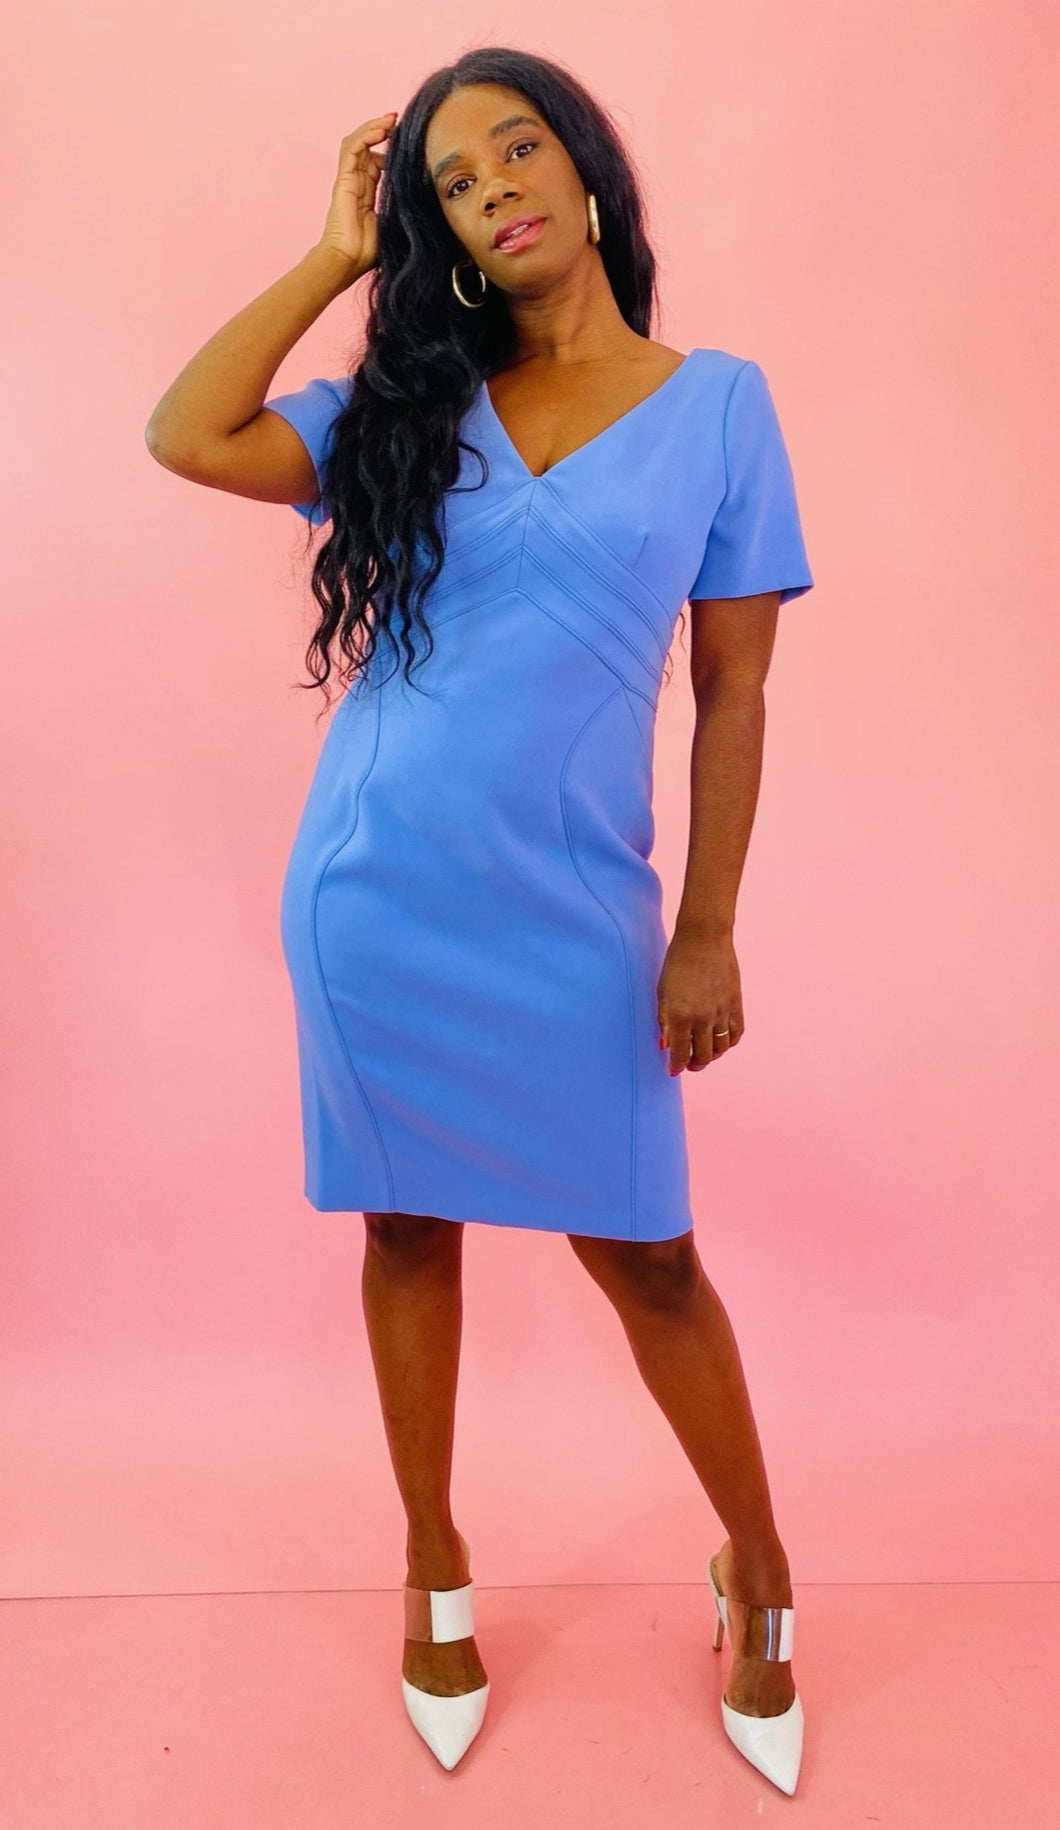 Full-body front view of a size 16 Zac Posen for 11 Honoré periwinkle blue v-neck short sleeve midi dress with pleated pattern styled with white heels on a size 10/12 model.